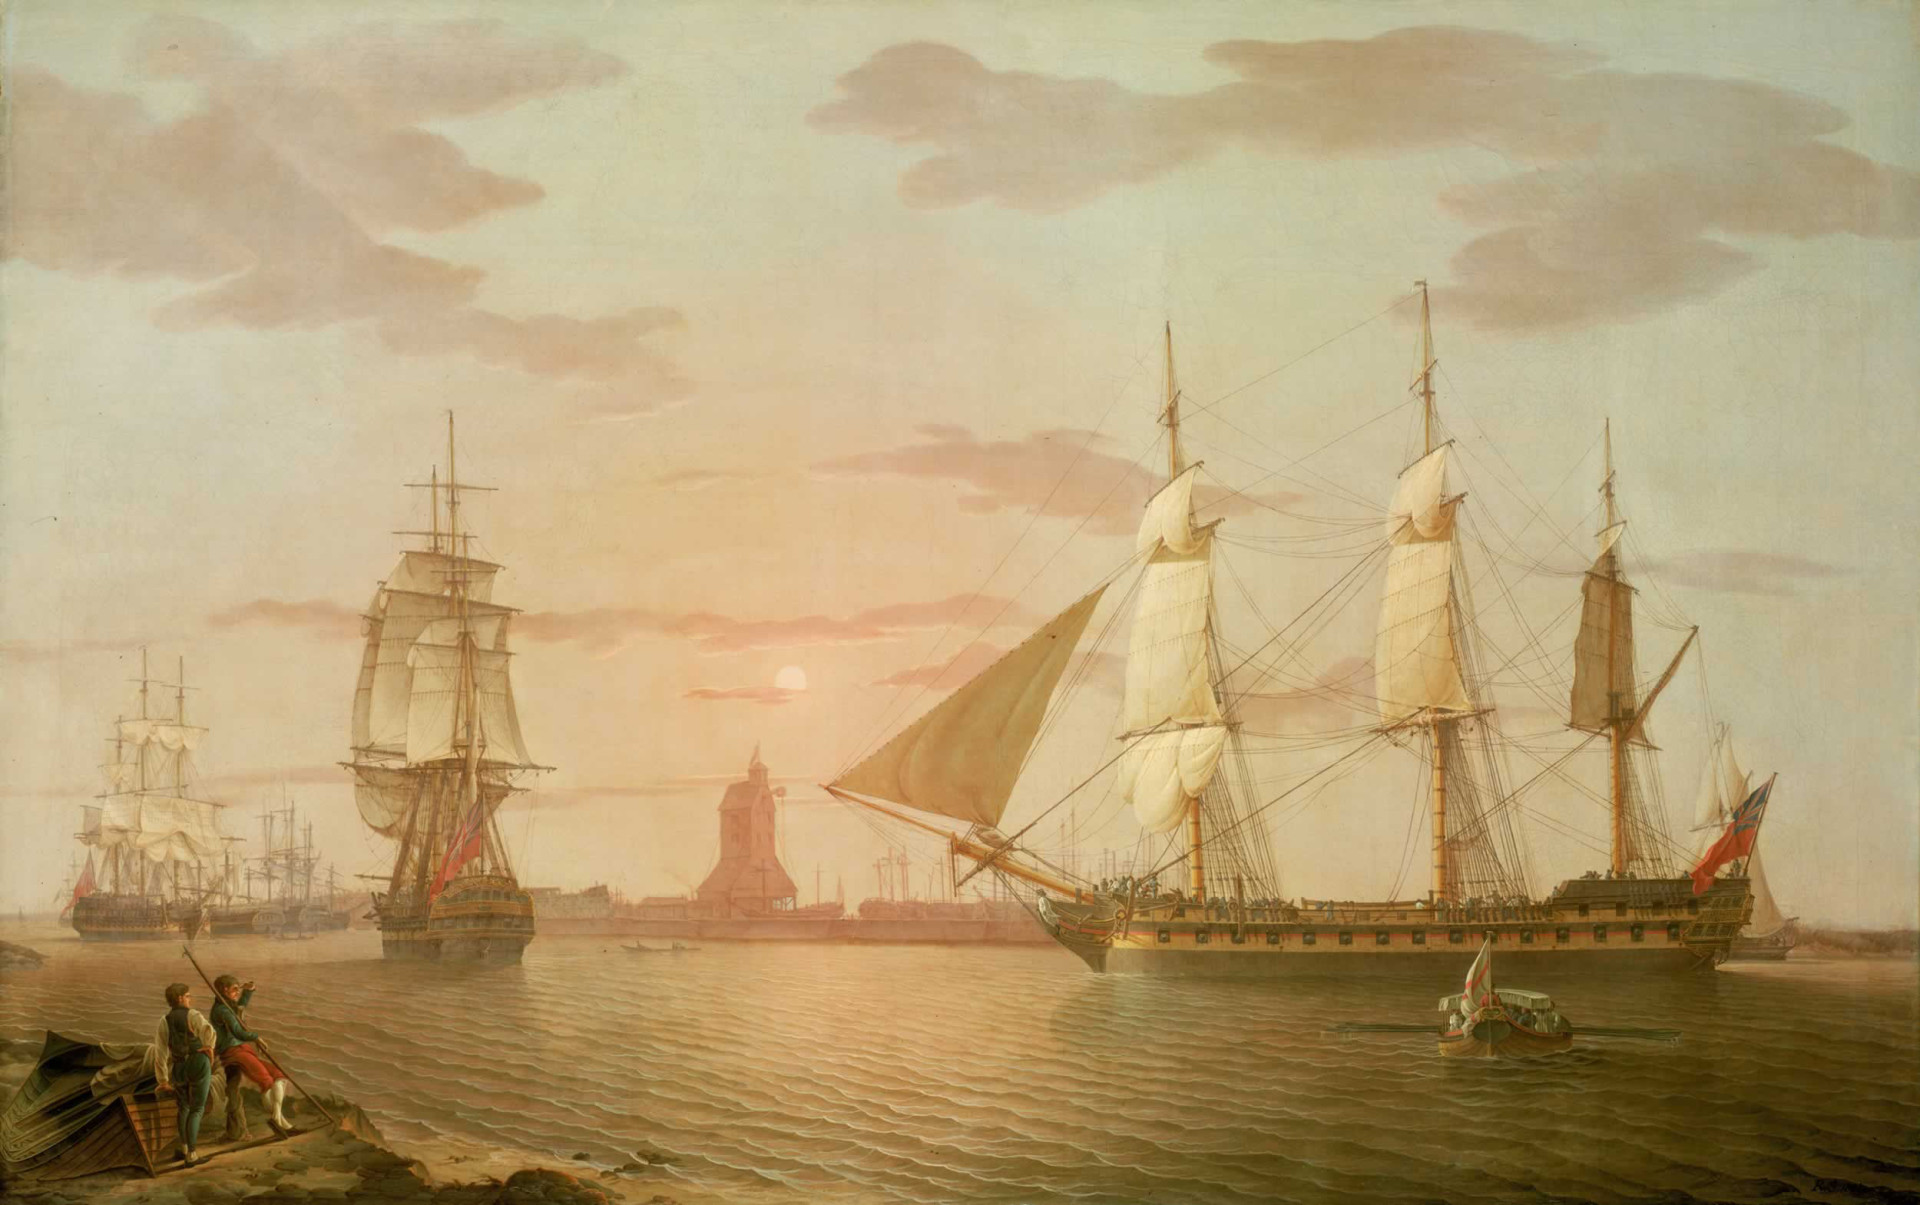 The Warley, a ship belonging to the British East India Company at the turn of the 19th century